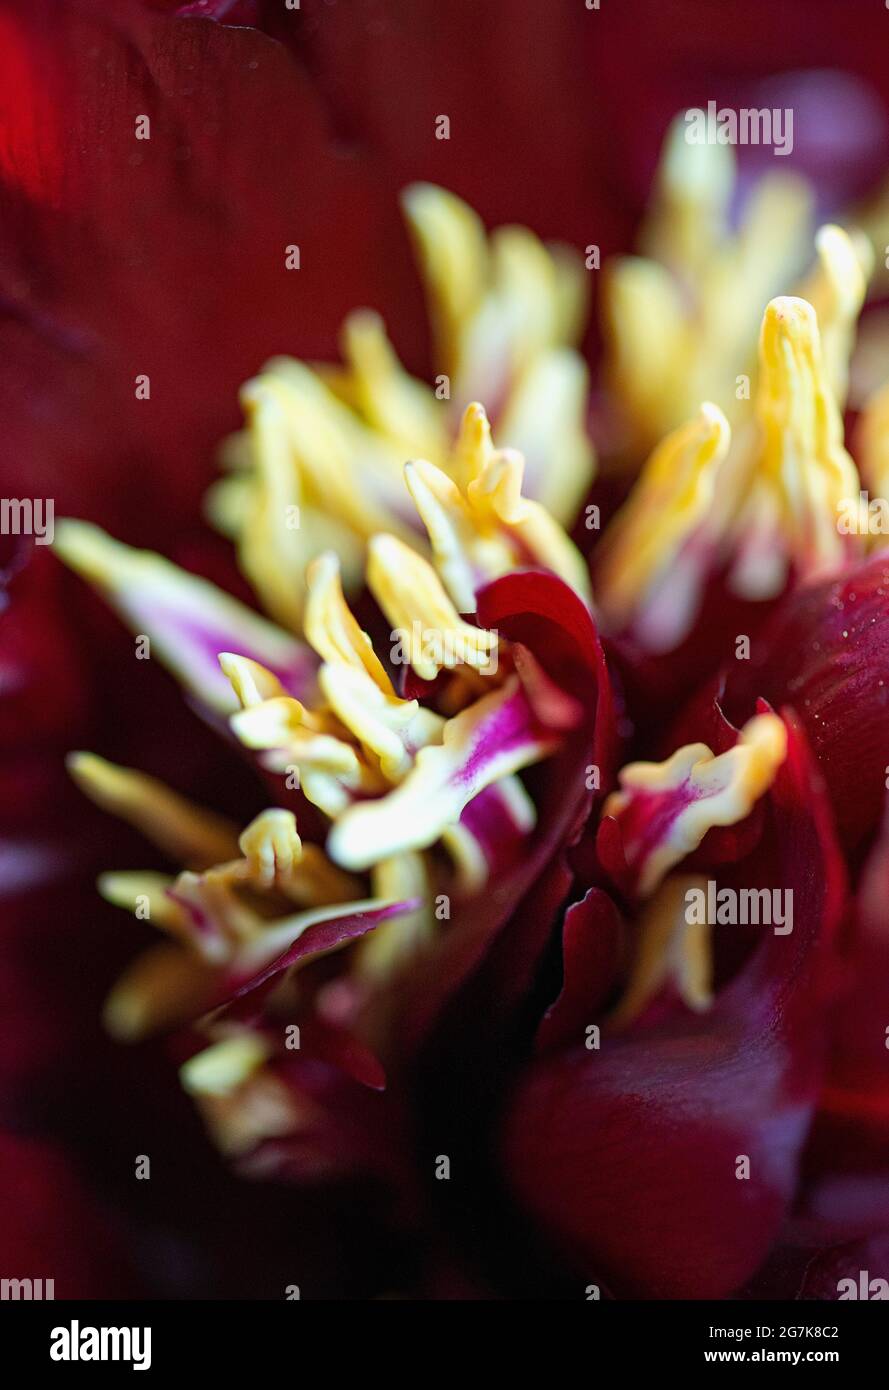 A close up of a Peony flower Stock Photo